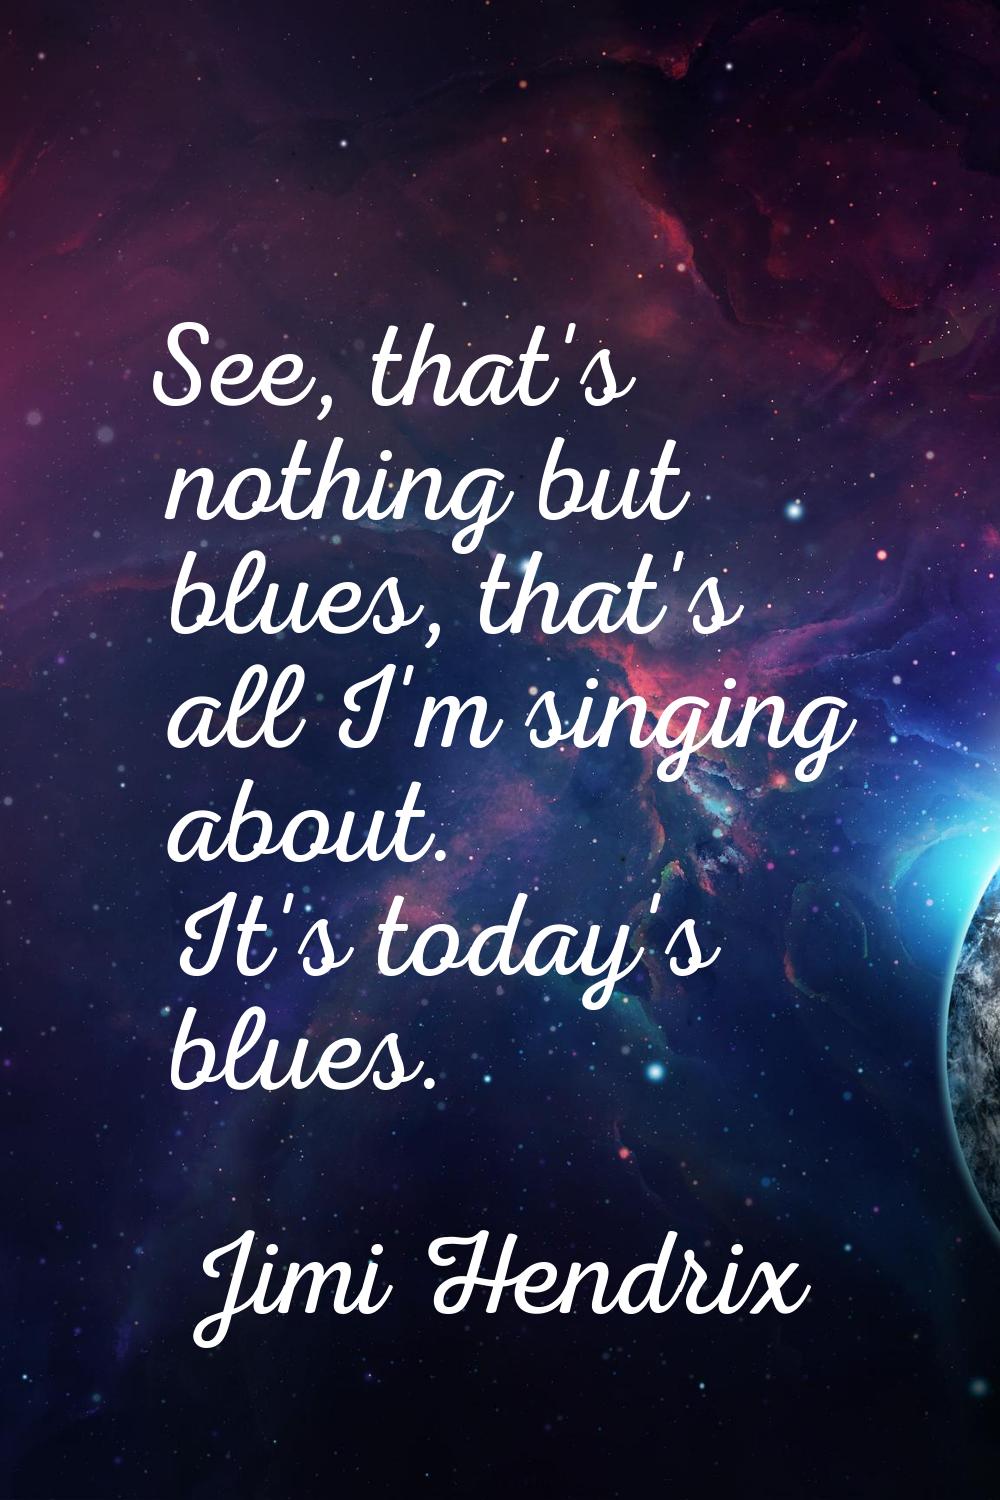 See, that's nothing but blues, that's all I'm singing about. It's today's blues.